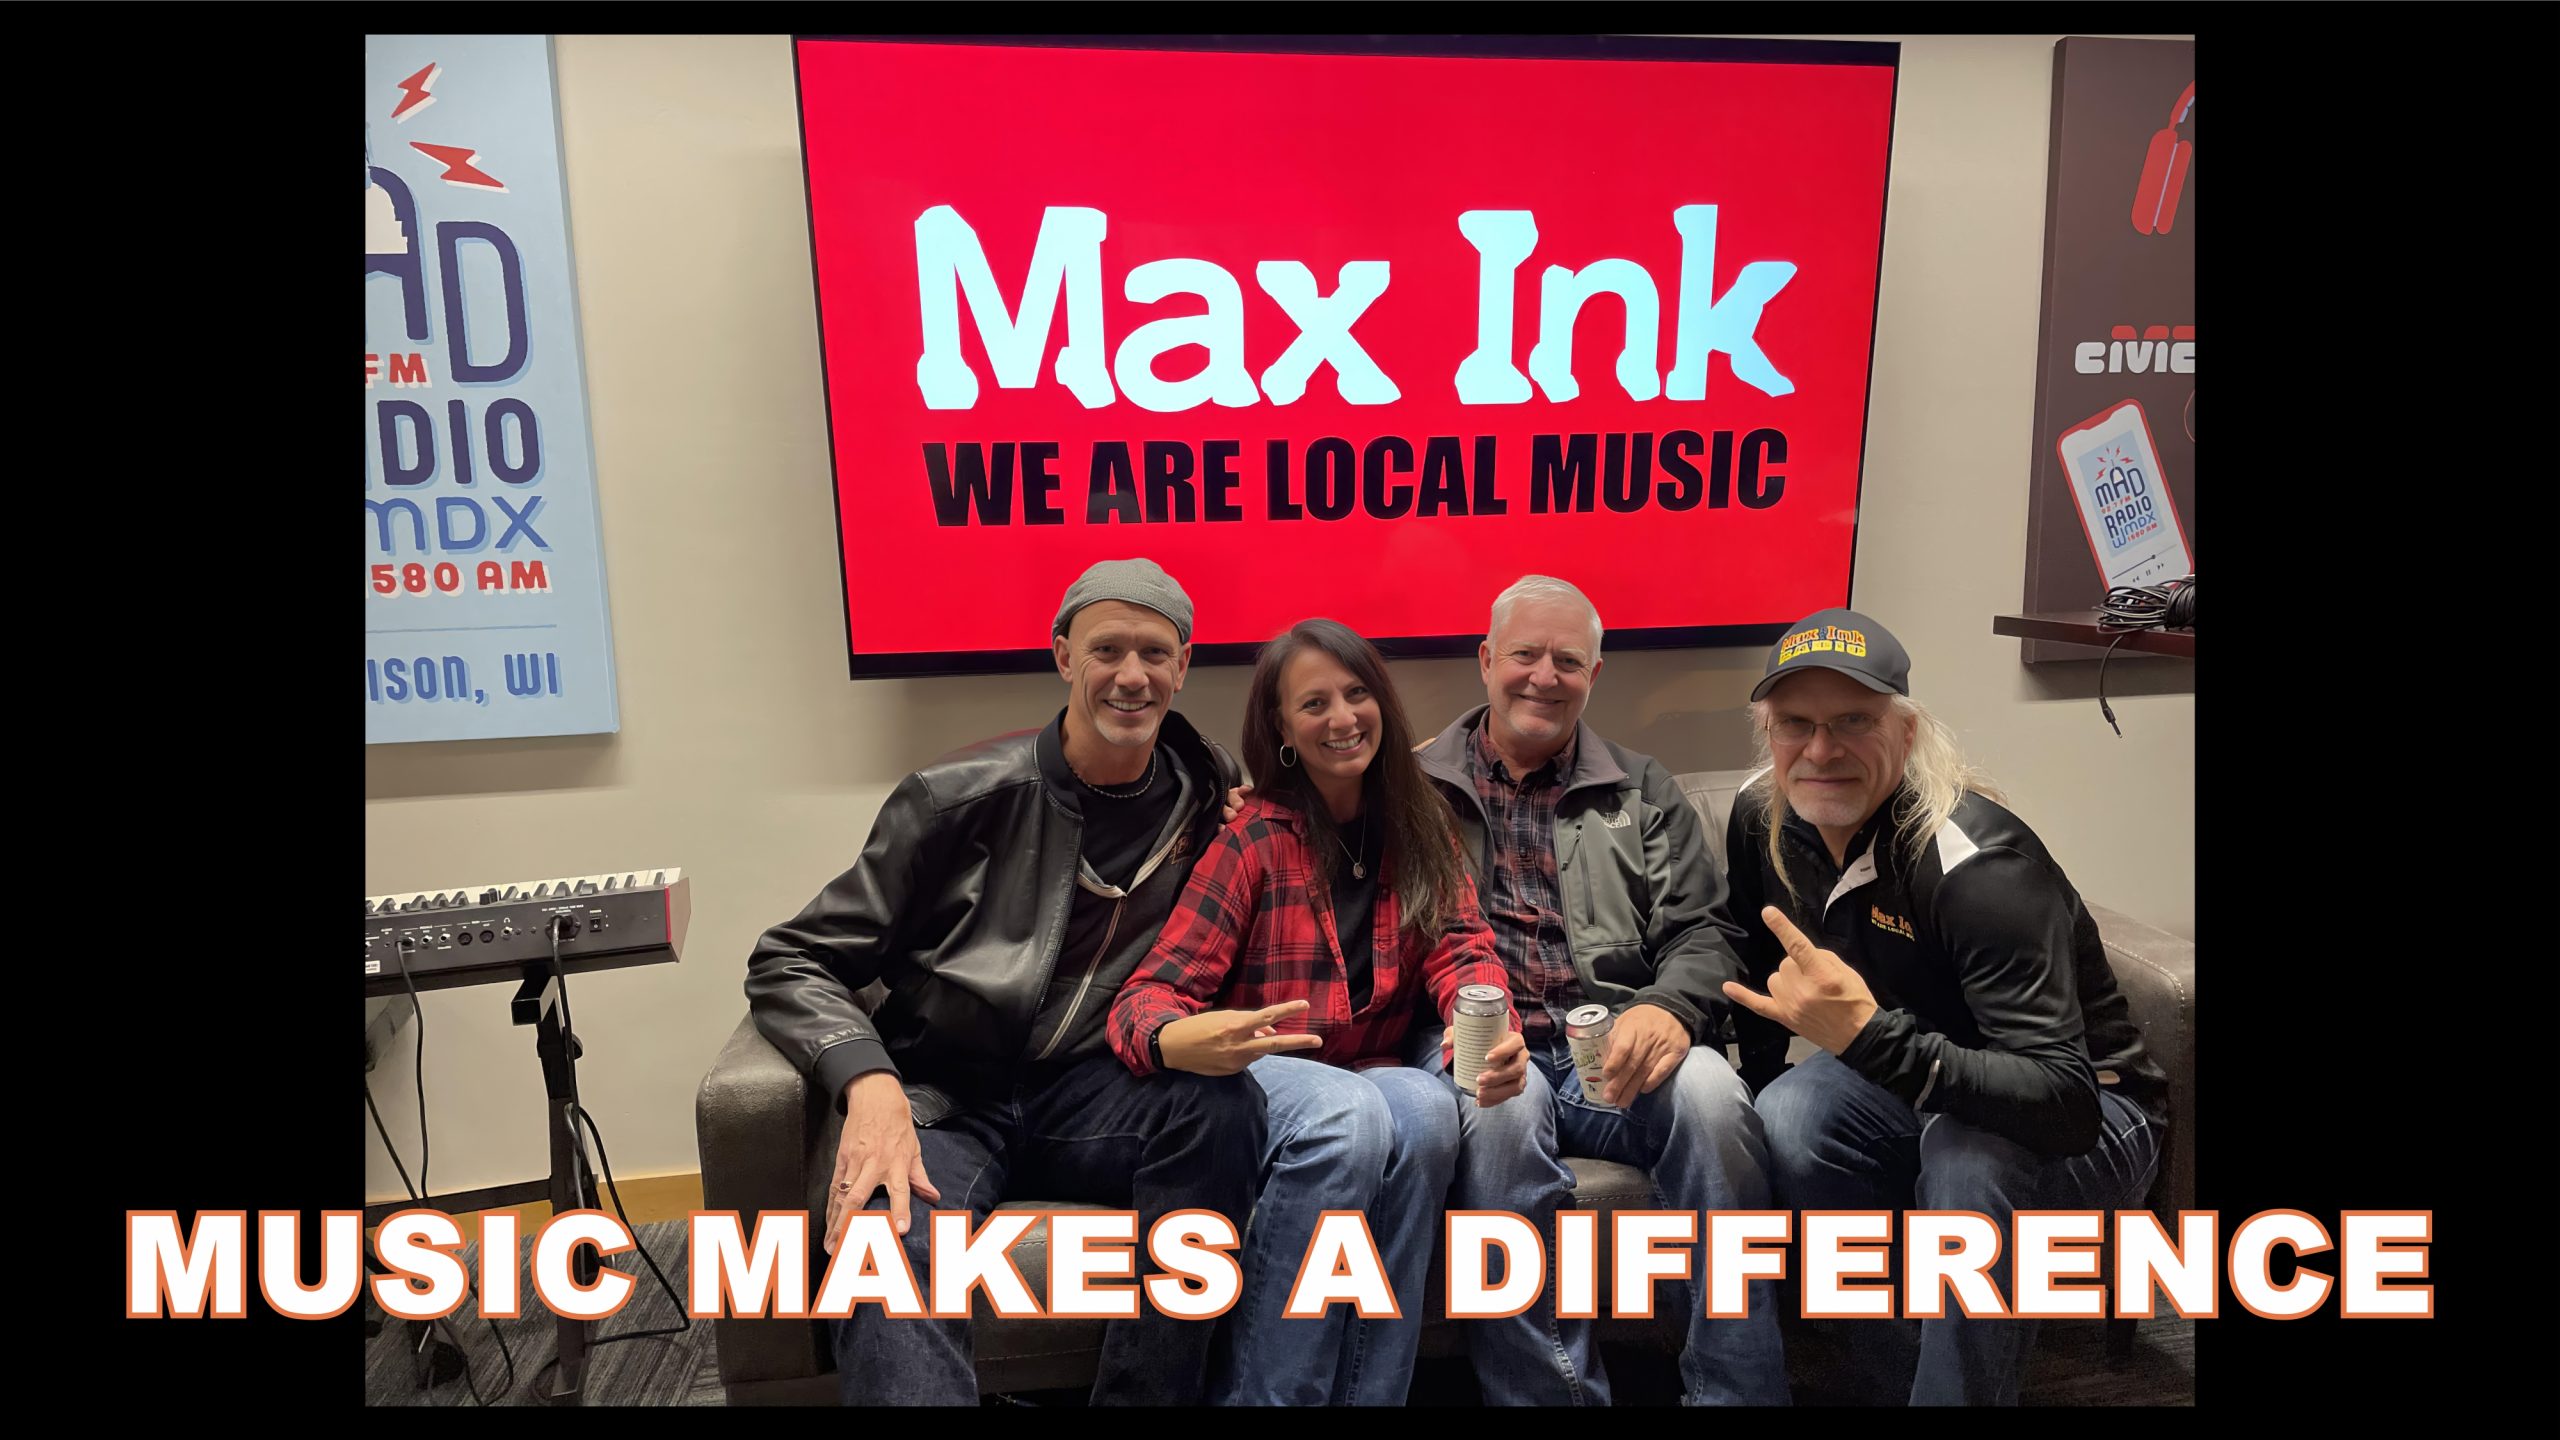 Music Makes a Difference crew at Max Ink Radio